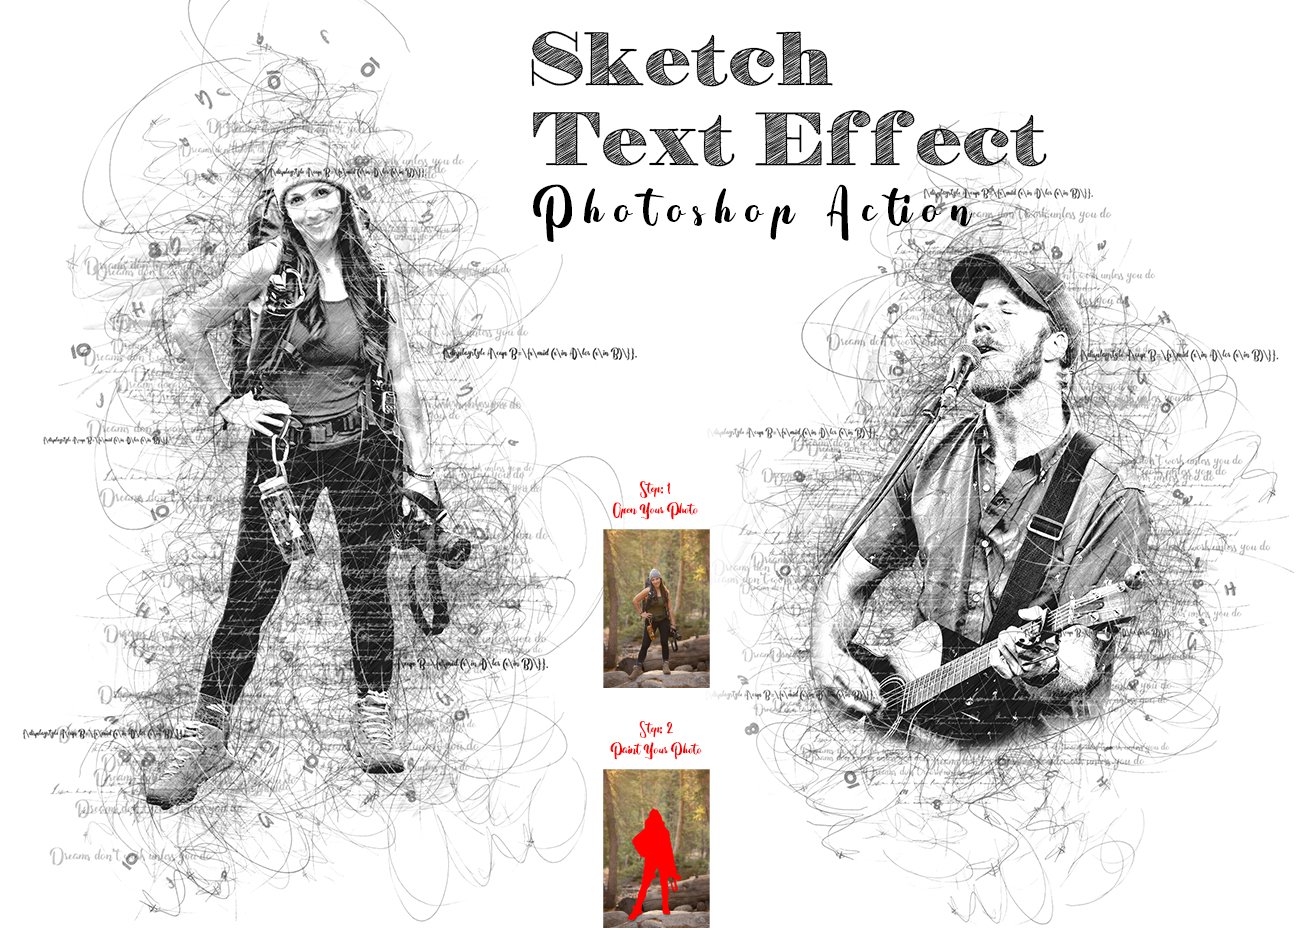 Sketch Text Effect Photoshop Actioncover image.